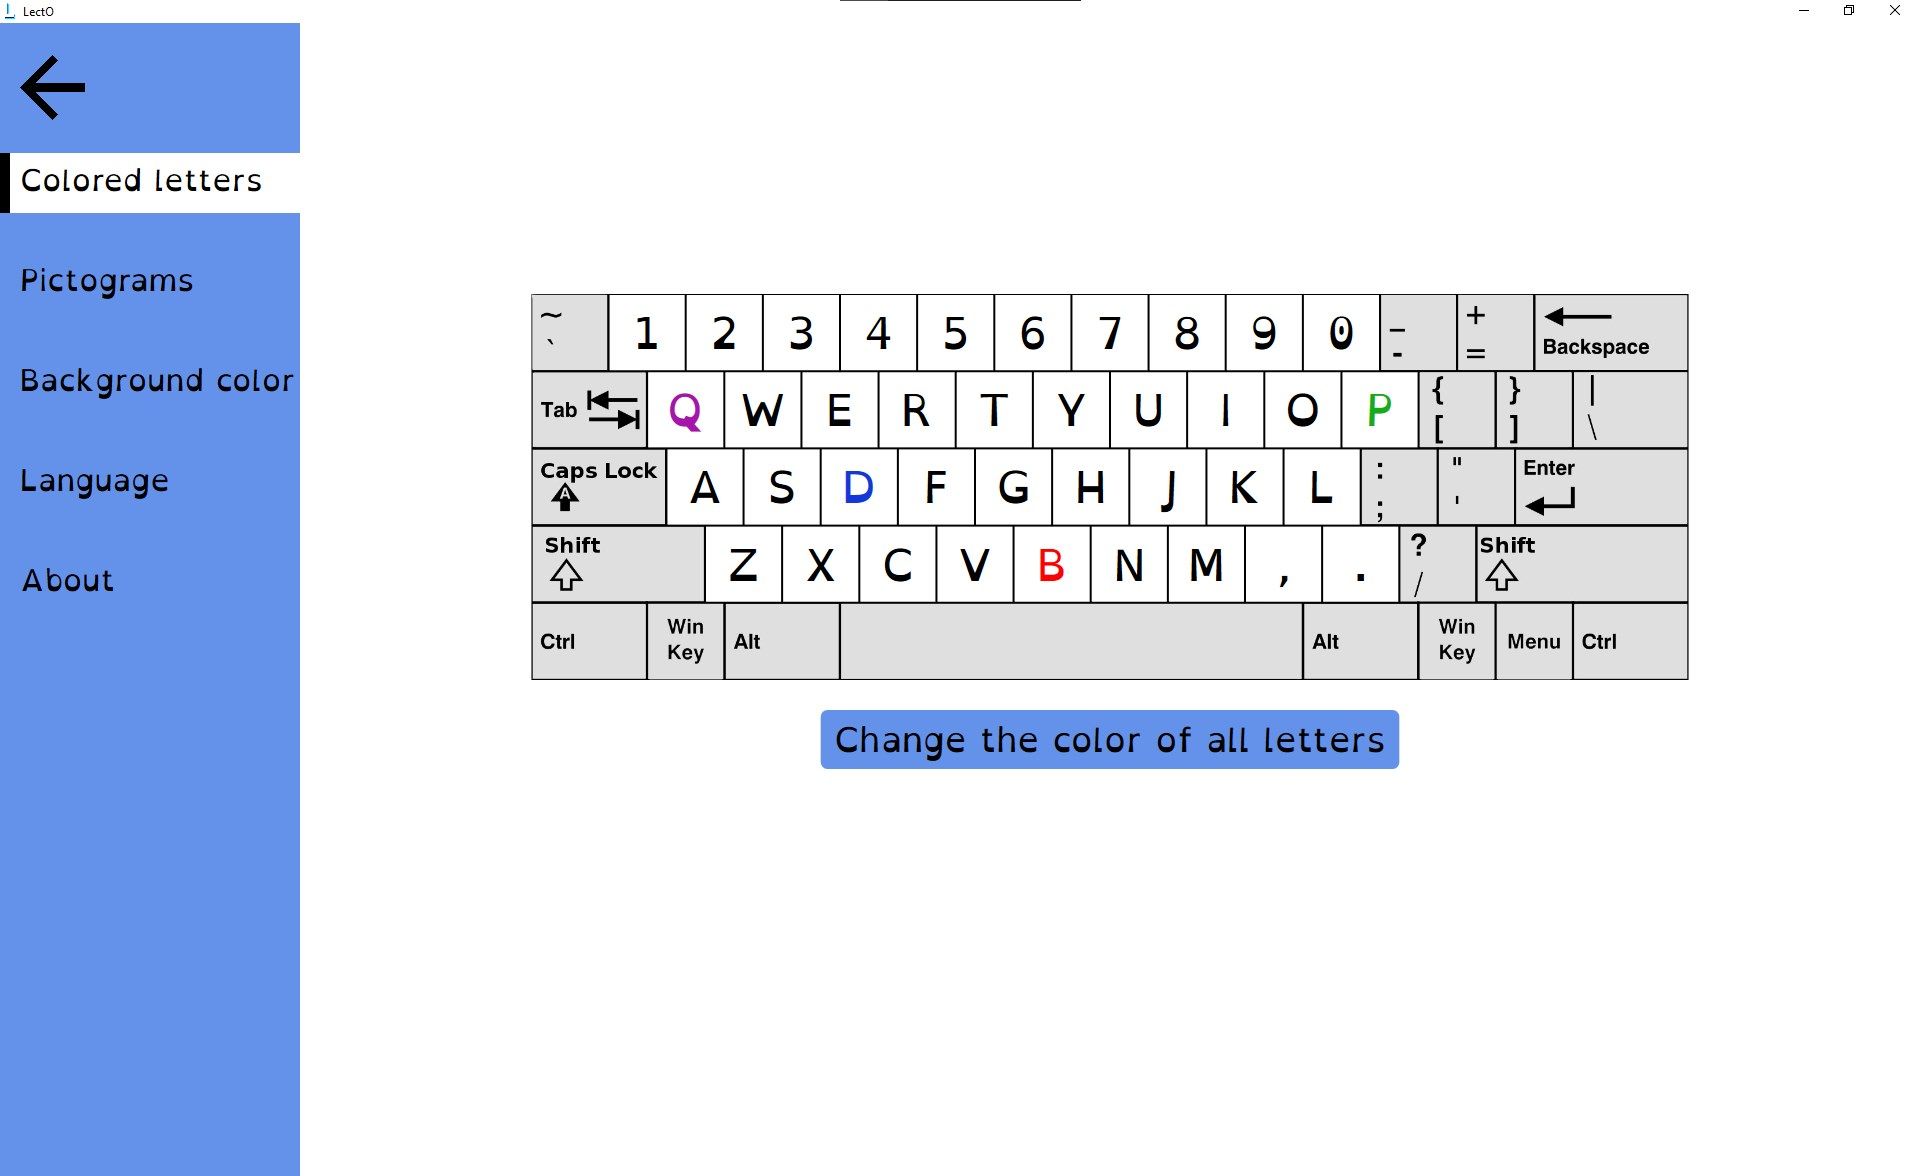 A colour can be configured for each letter, helping users to read faster.